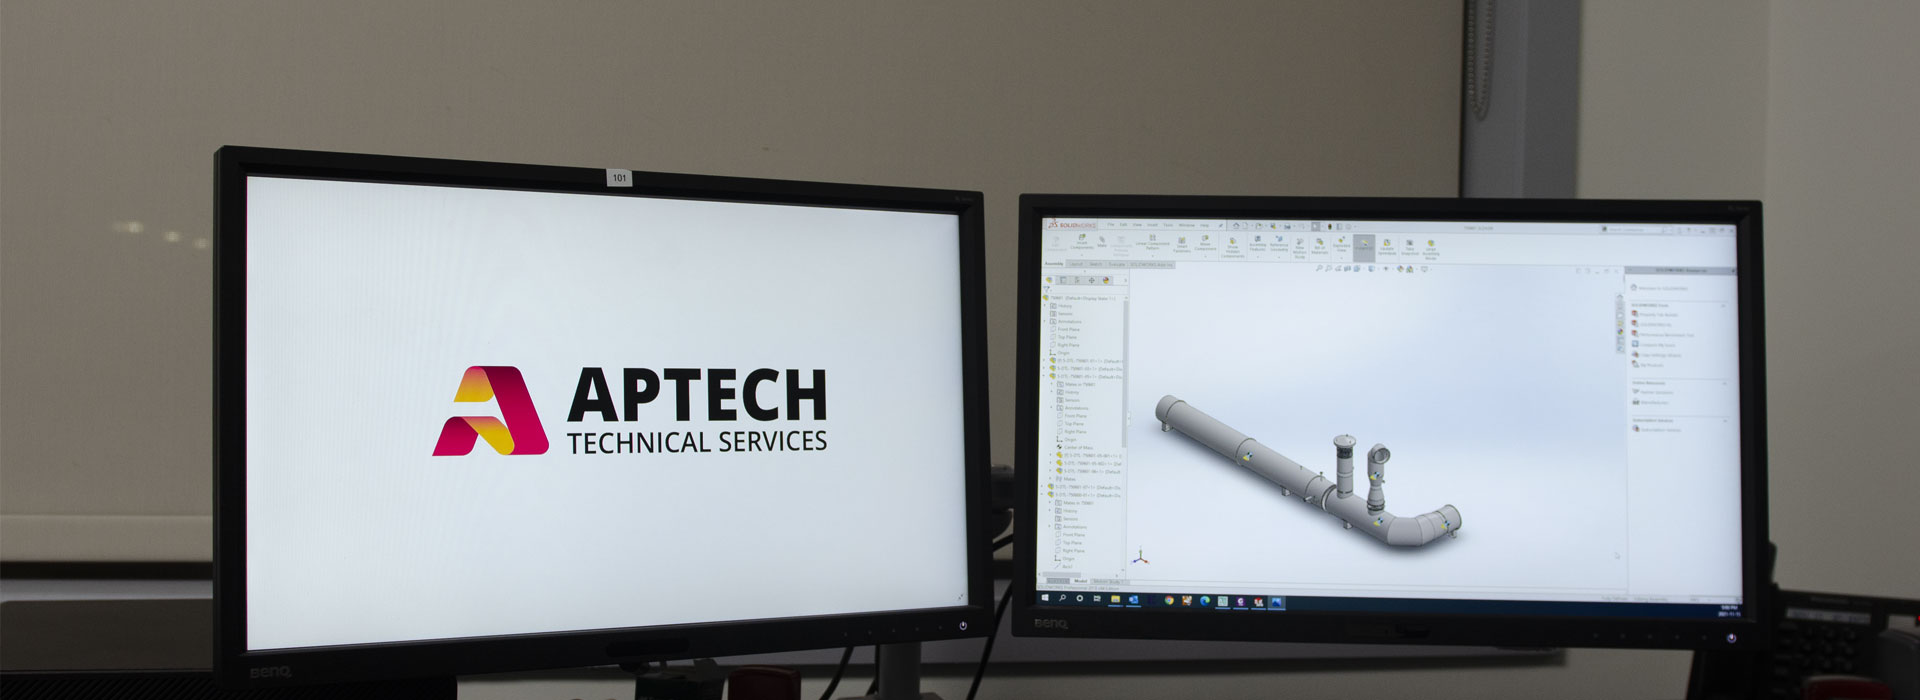 About Aptech Technical Services